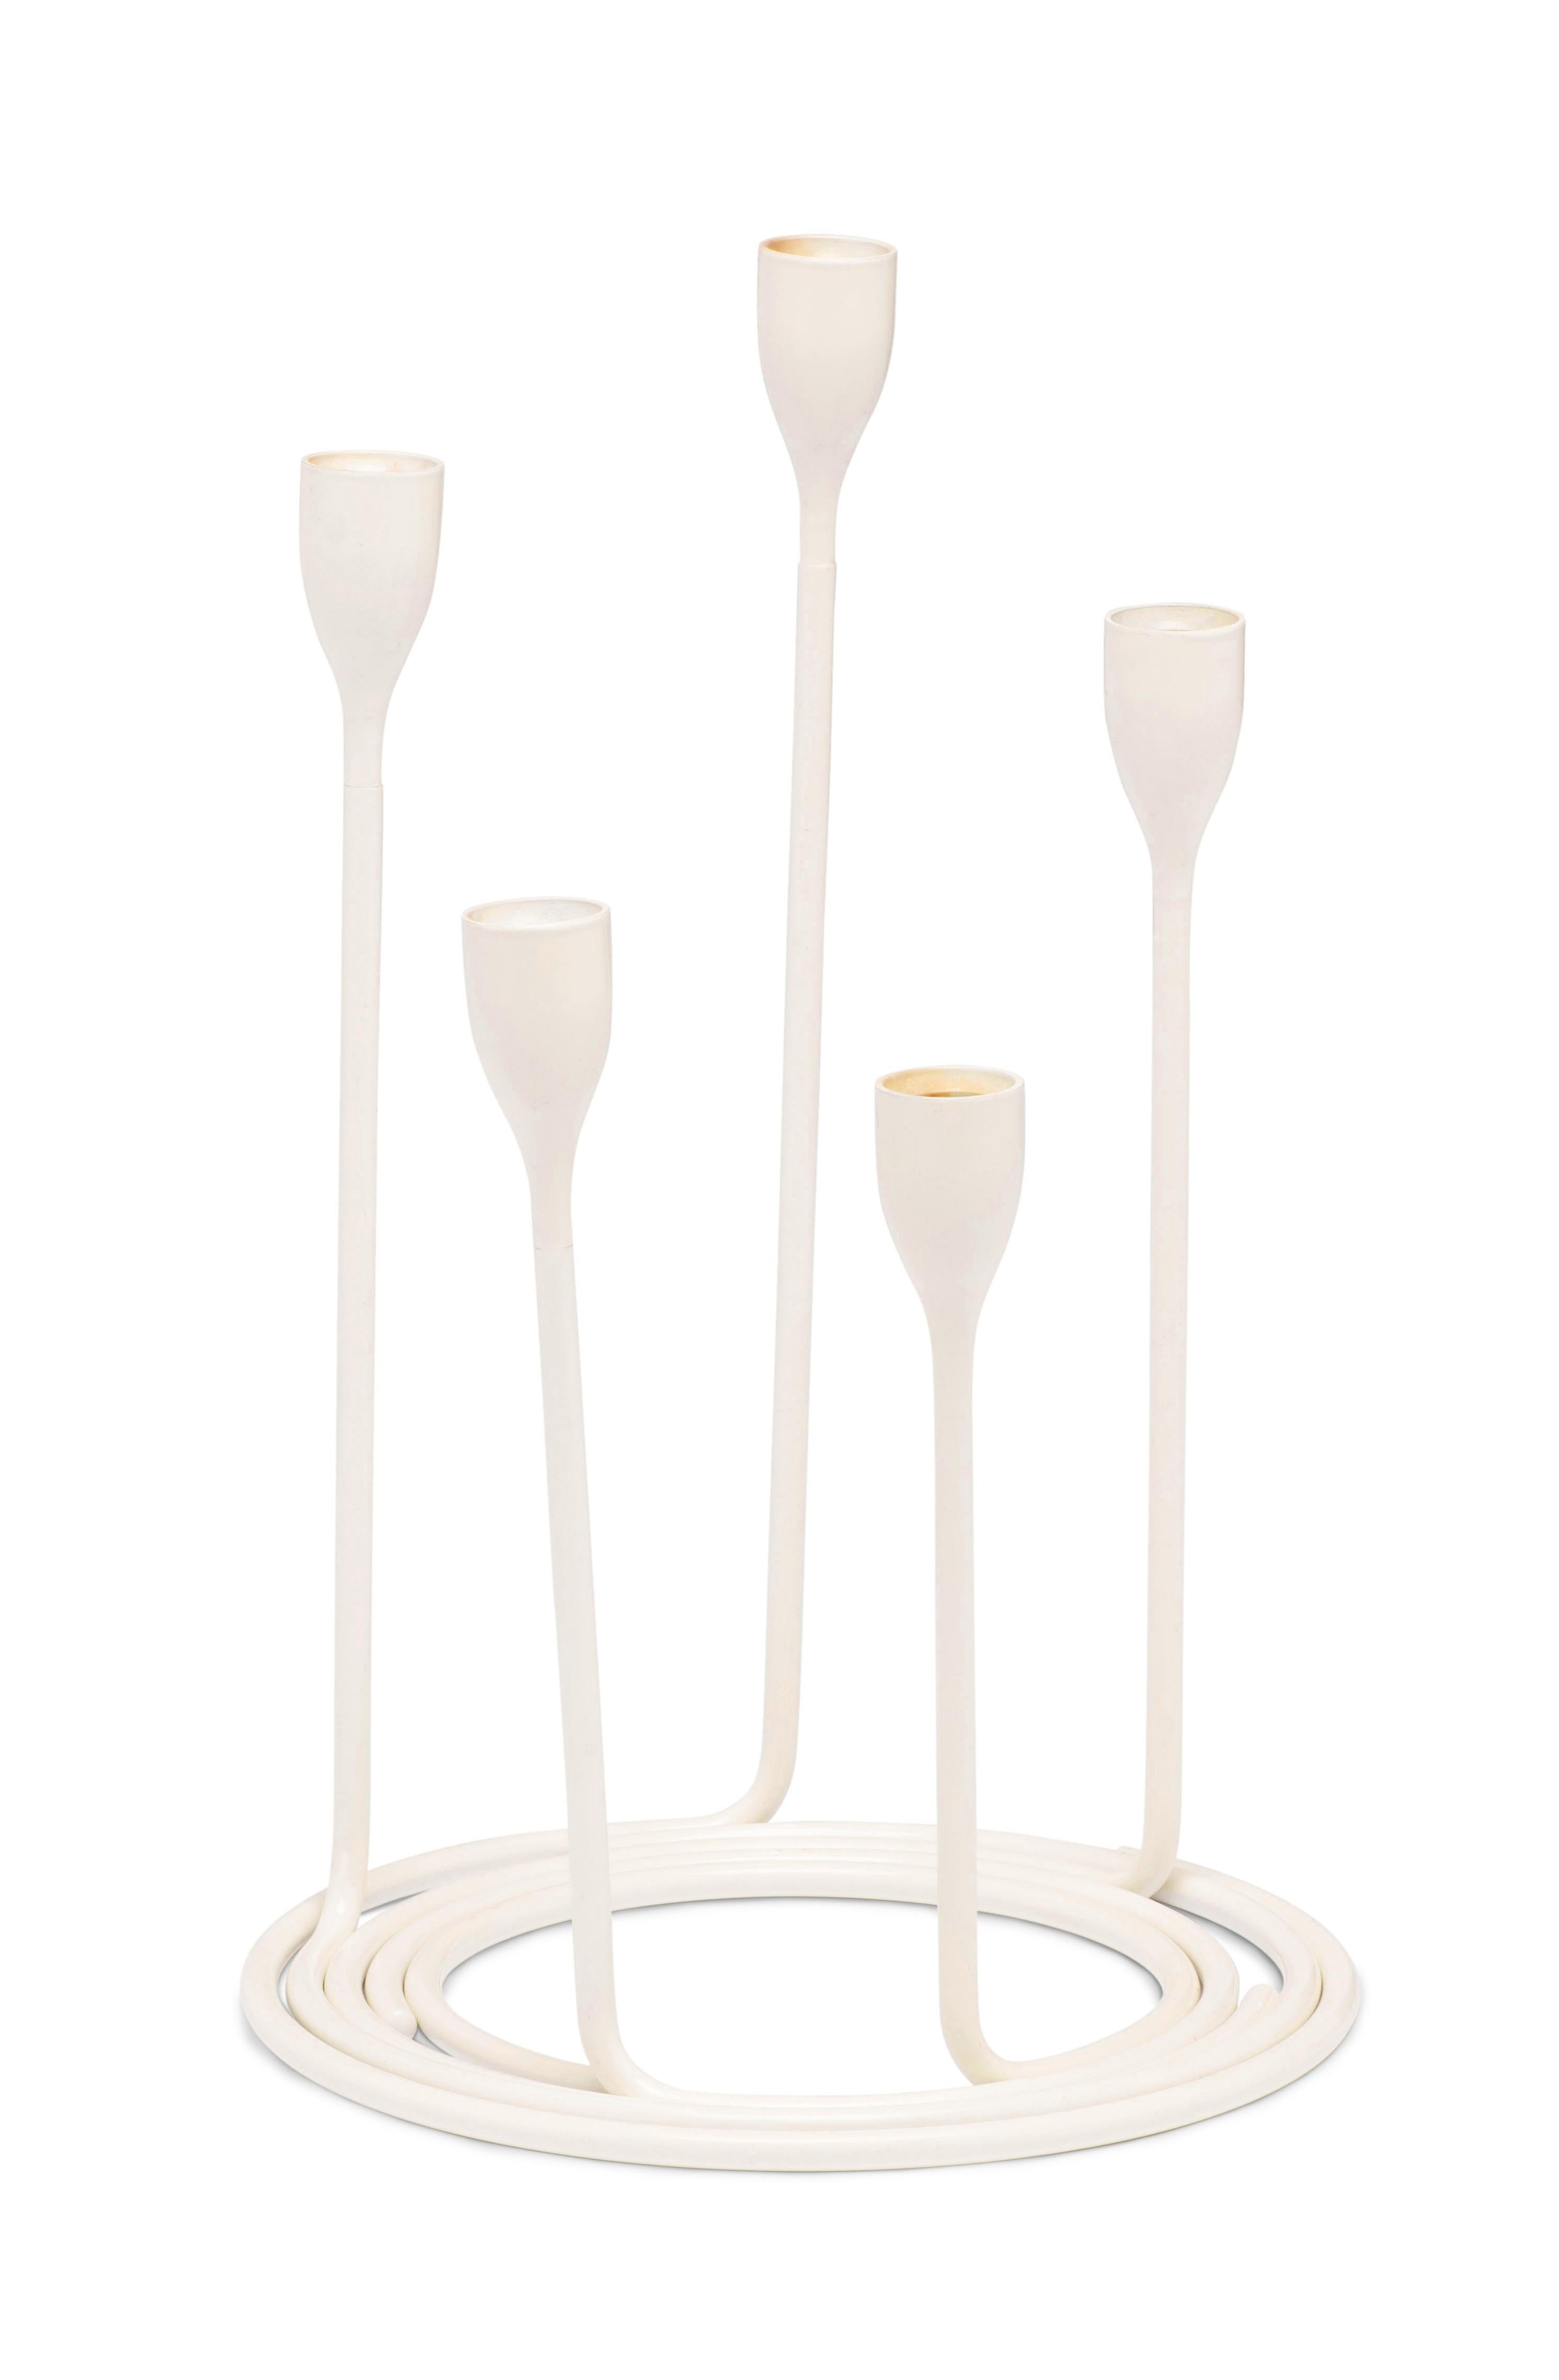 A beautiful set of five candleholders that can be assembled altogether or presented individually. 

Please contact us for more information and for alternative shipping quotes. 